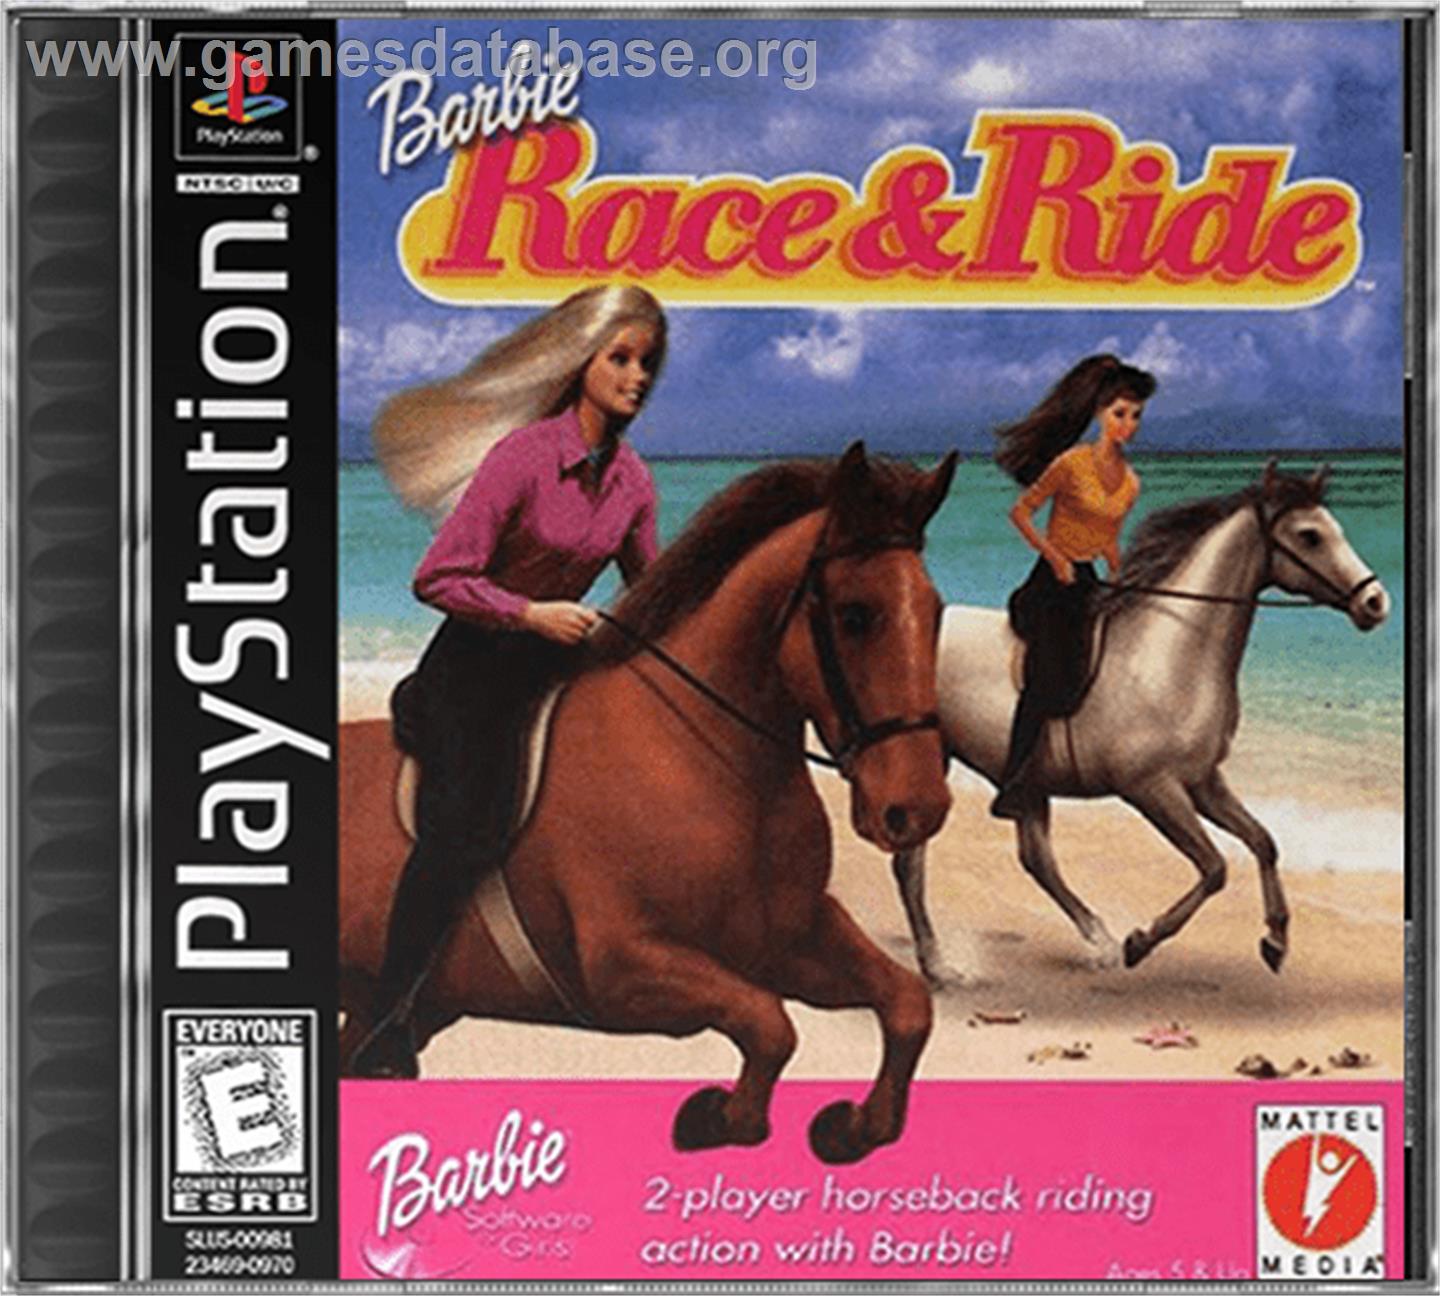 Barbie: Race and Ride - Sony Playstation - Artwork - Box